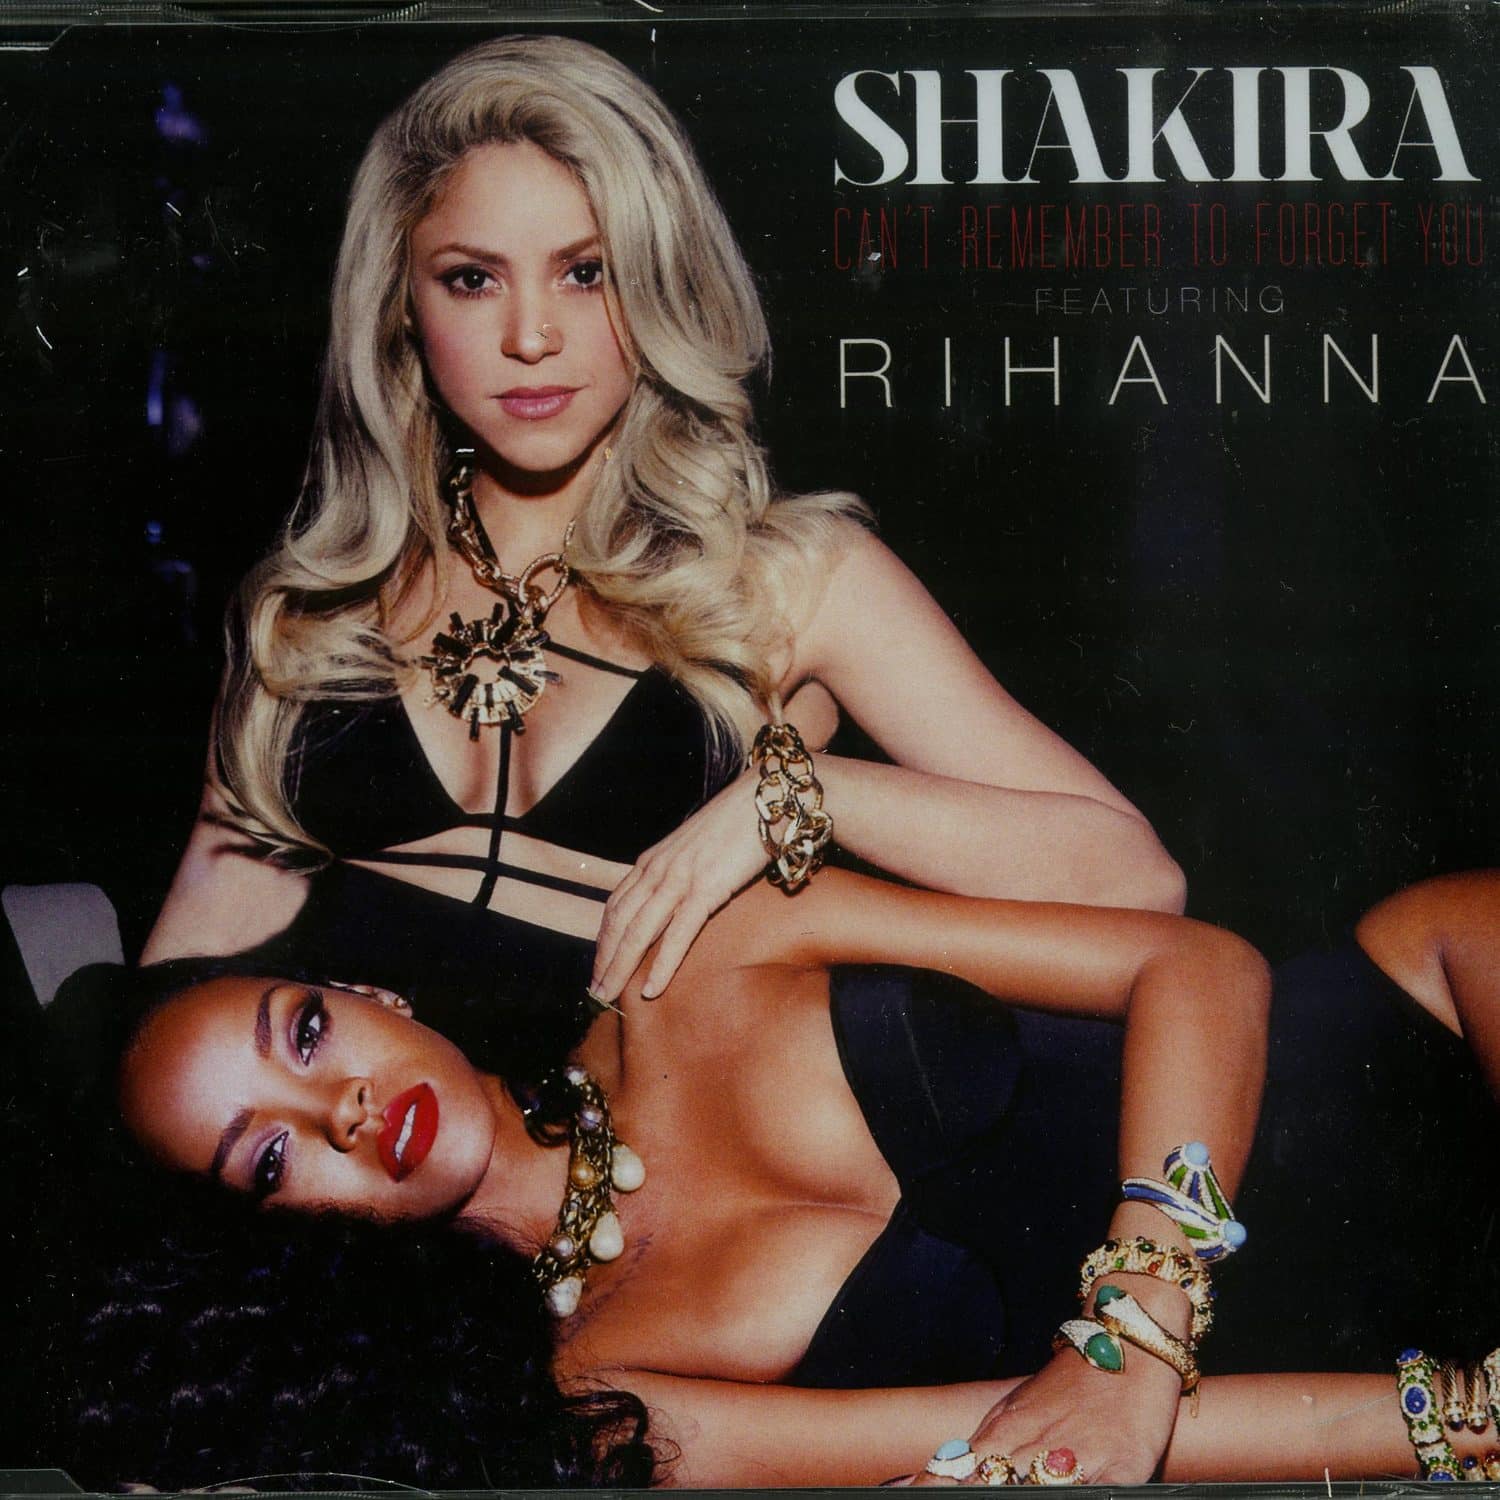 Shakira feat. Rihanna - CANT REMEMBER TO FORGOT YOU 